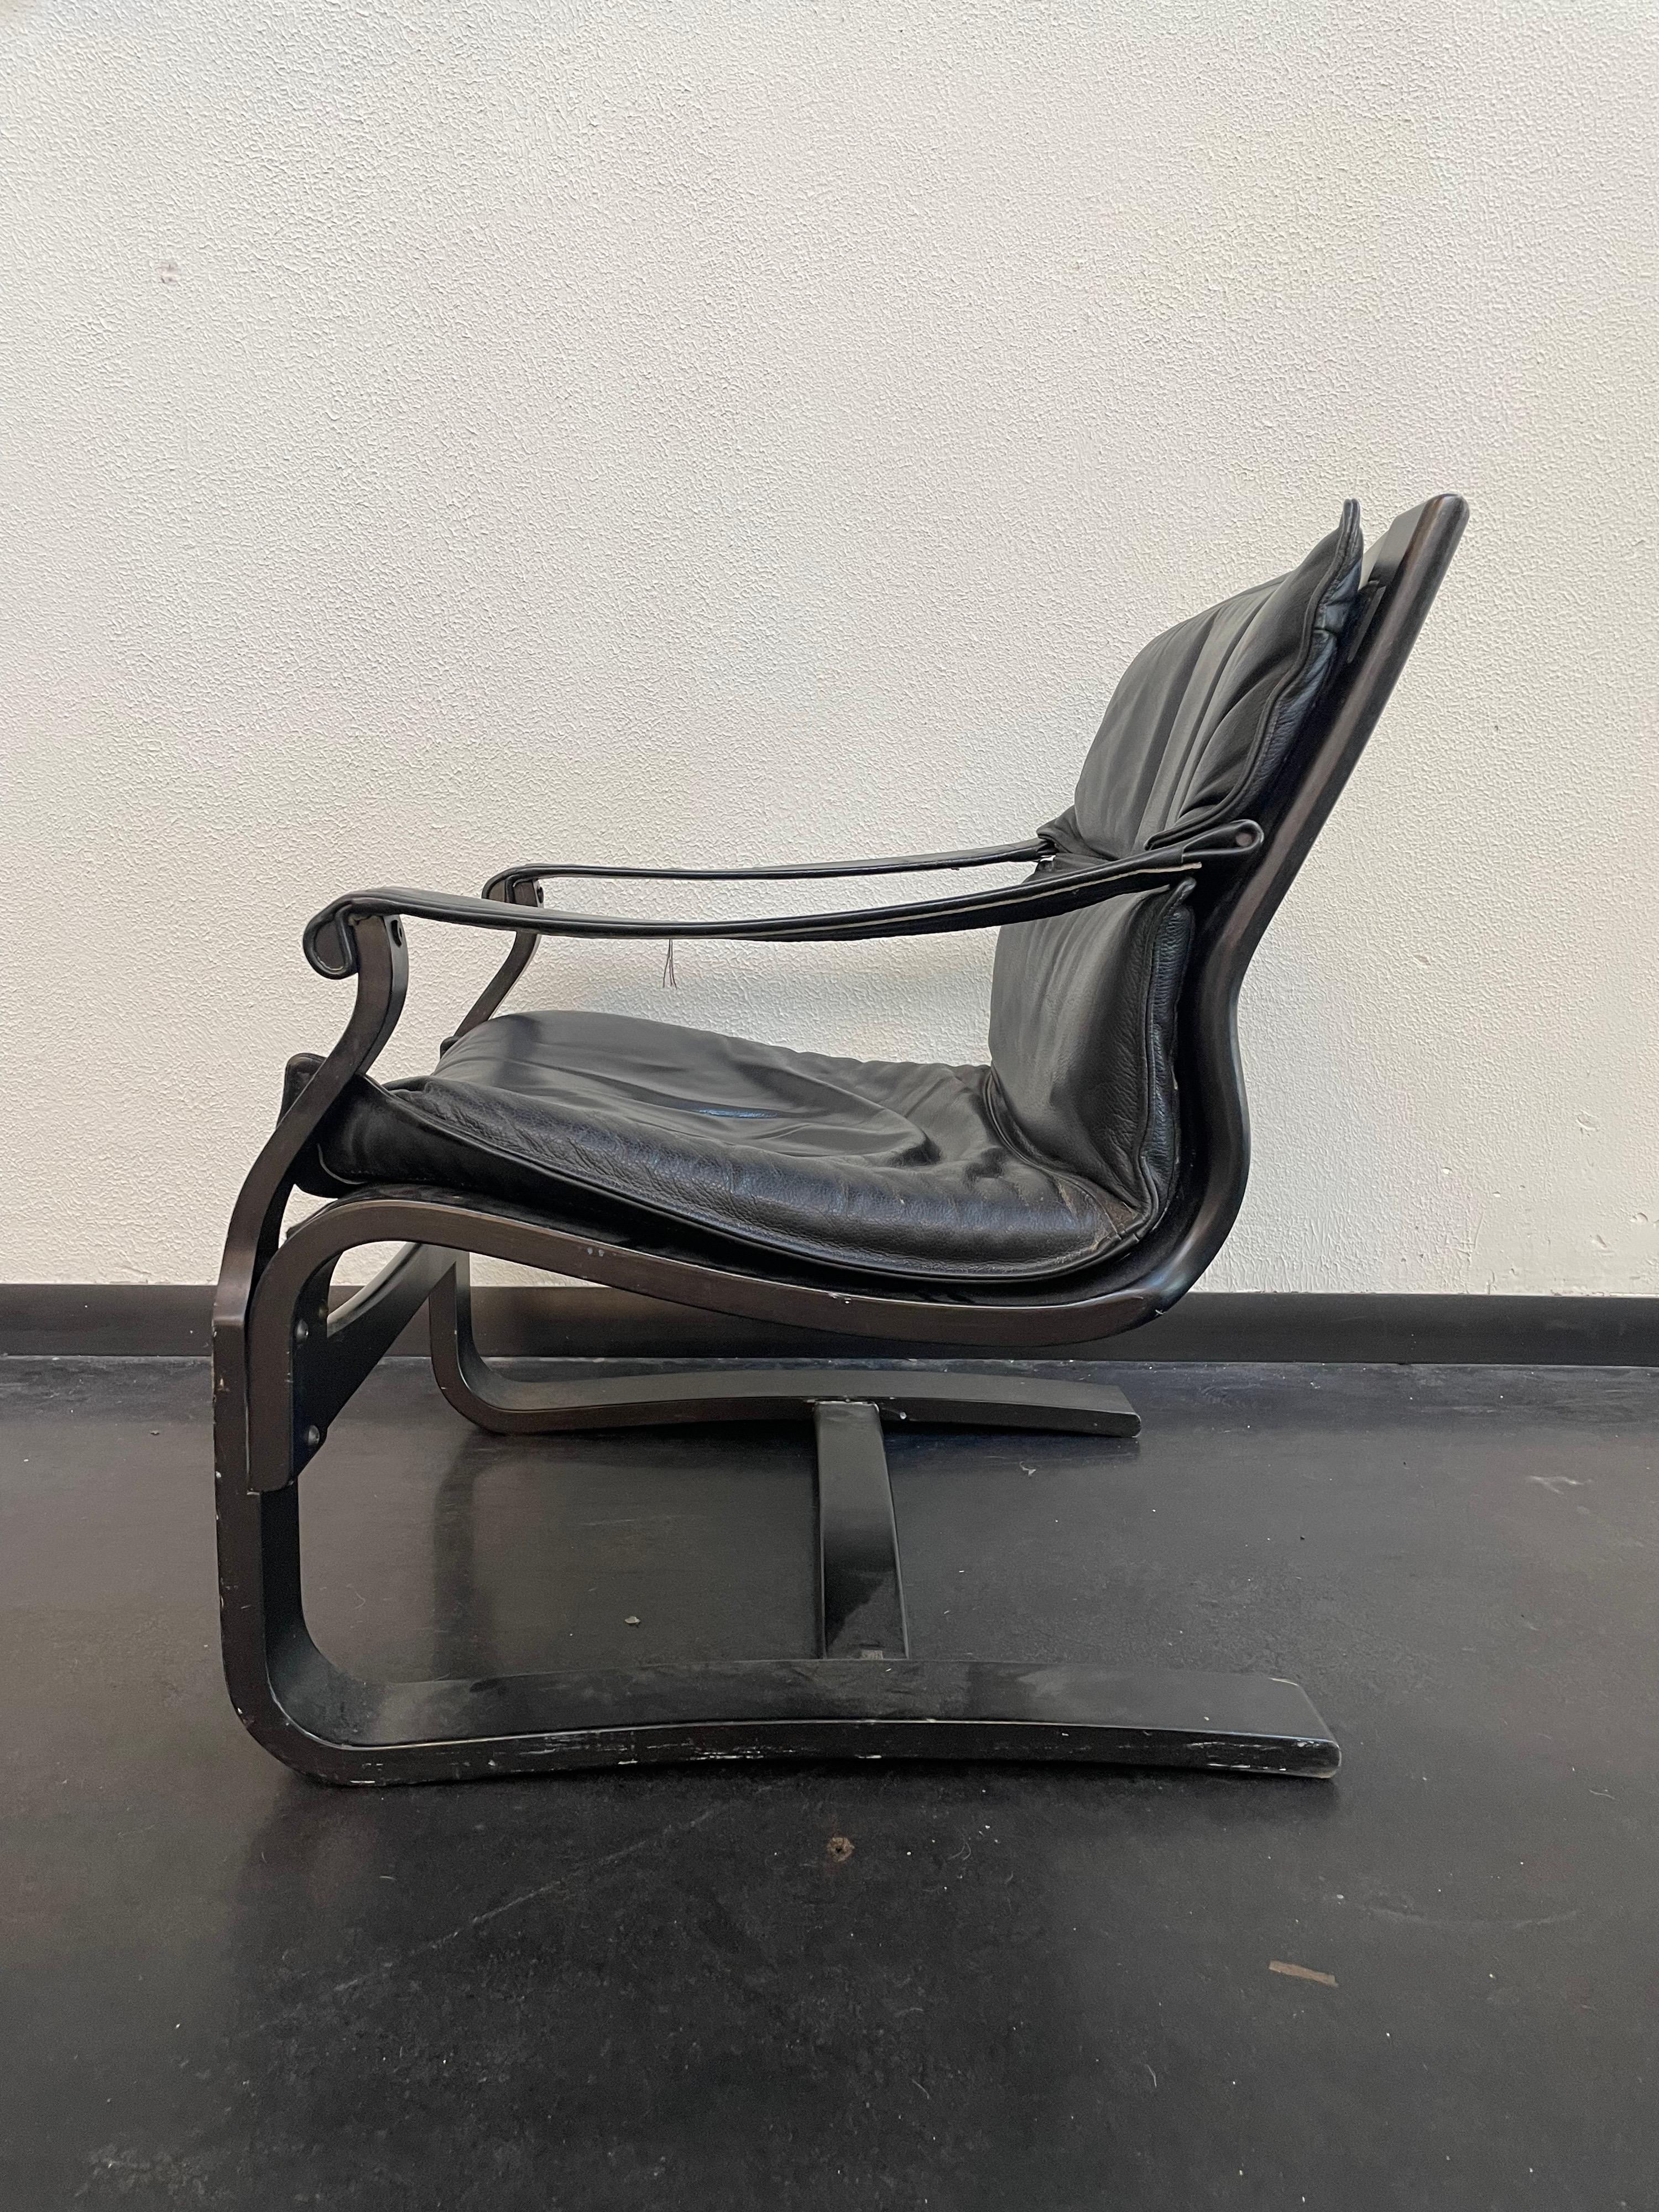 Vintage Swedish Black Leather Lounge Chair. Designed by Åke Fribytter. Manufactured by Nelo in Sweden. A cool cantilevered frame of ebonized bent plywood with original leather upholstery.